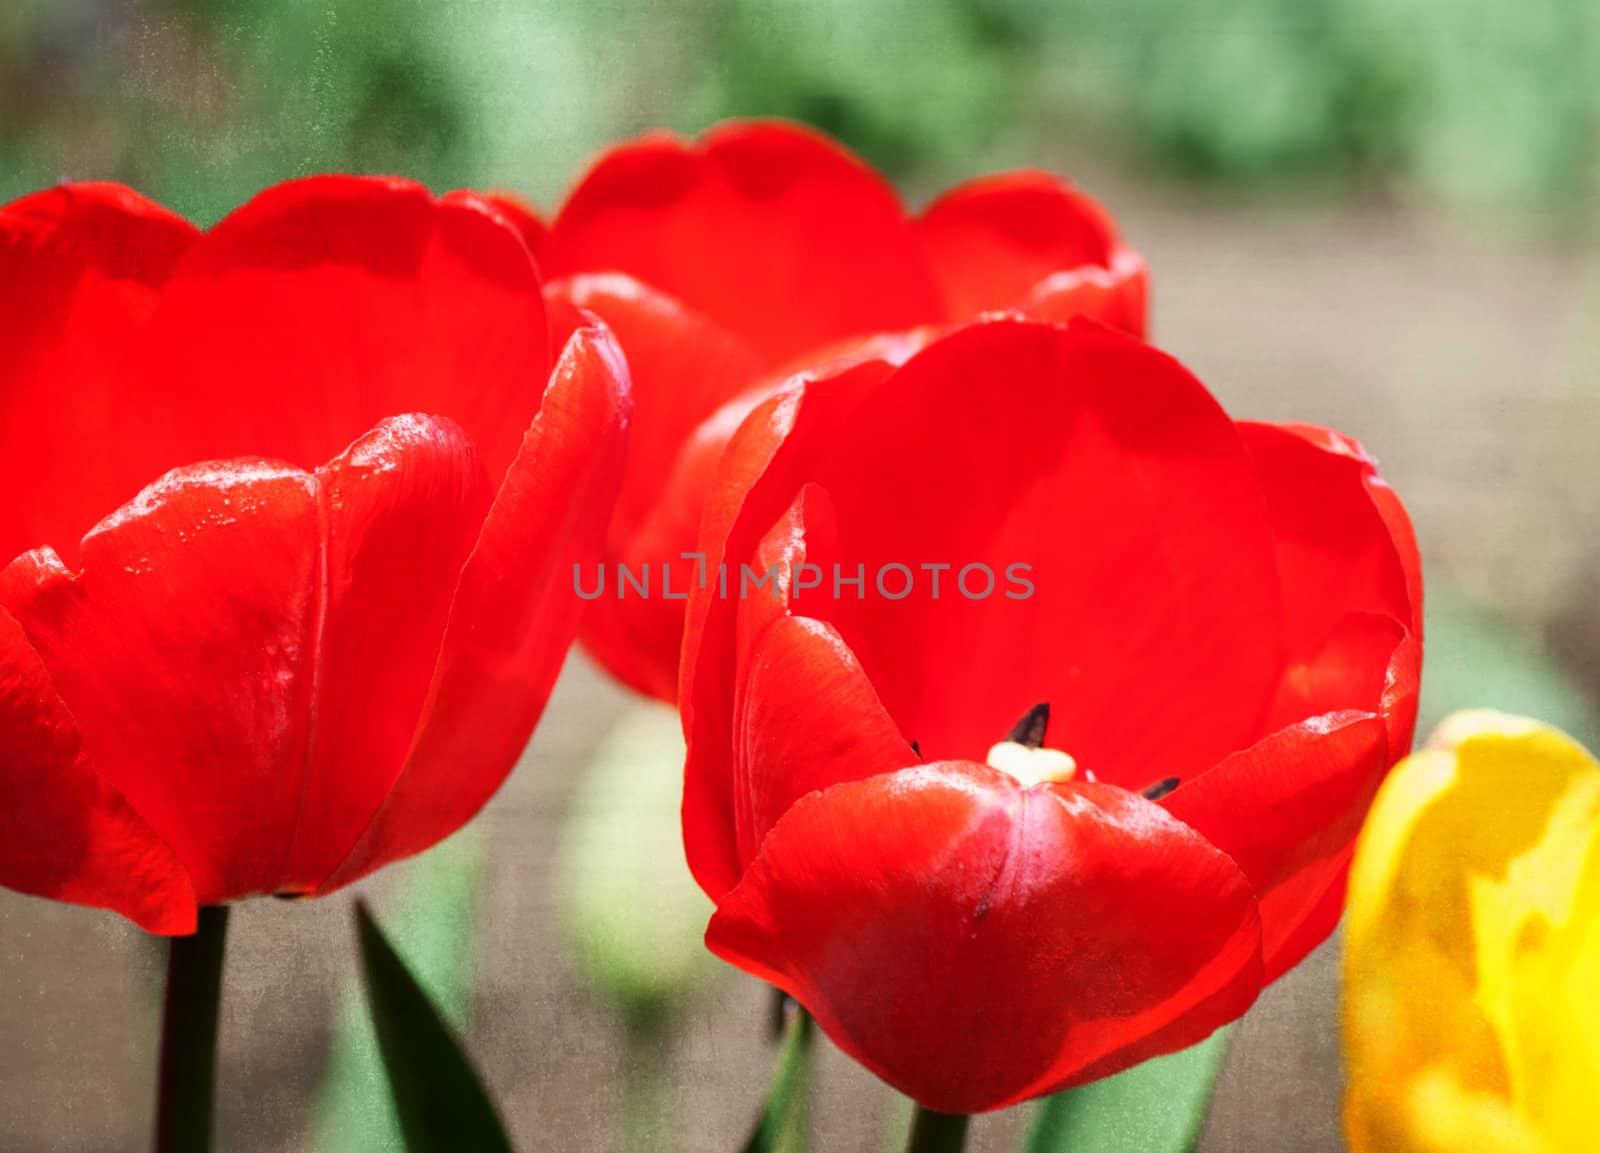 Red tulips, textured paper background by Zhukow